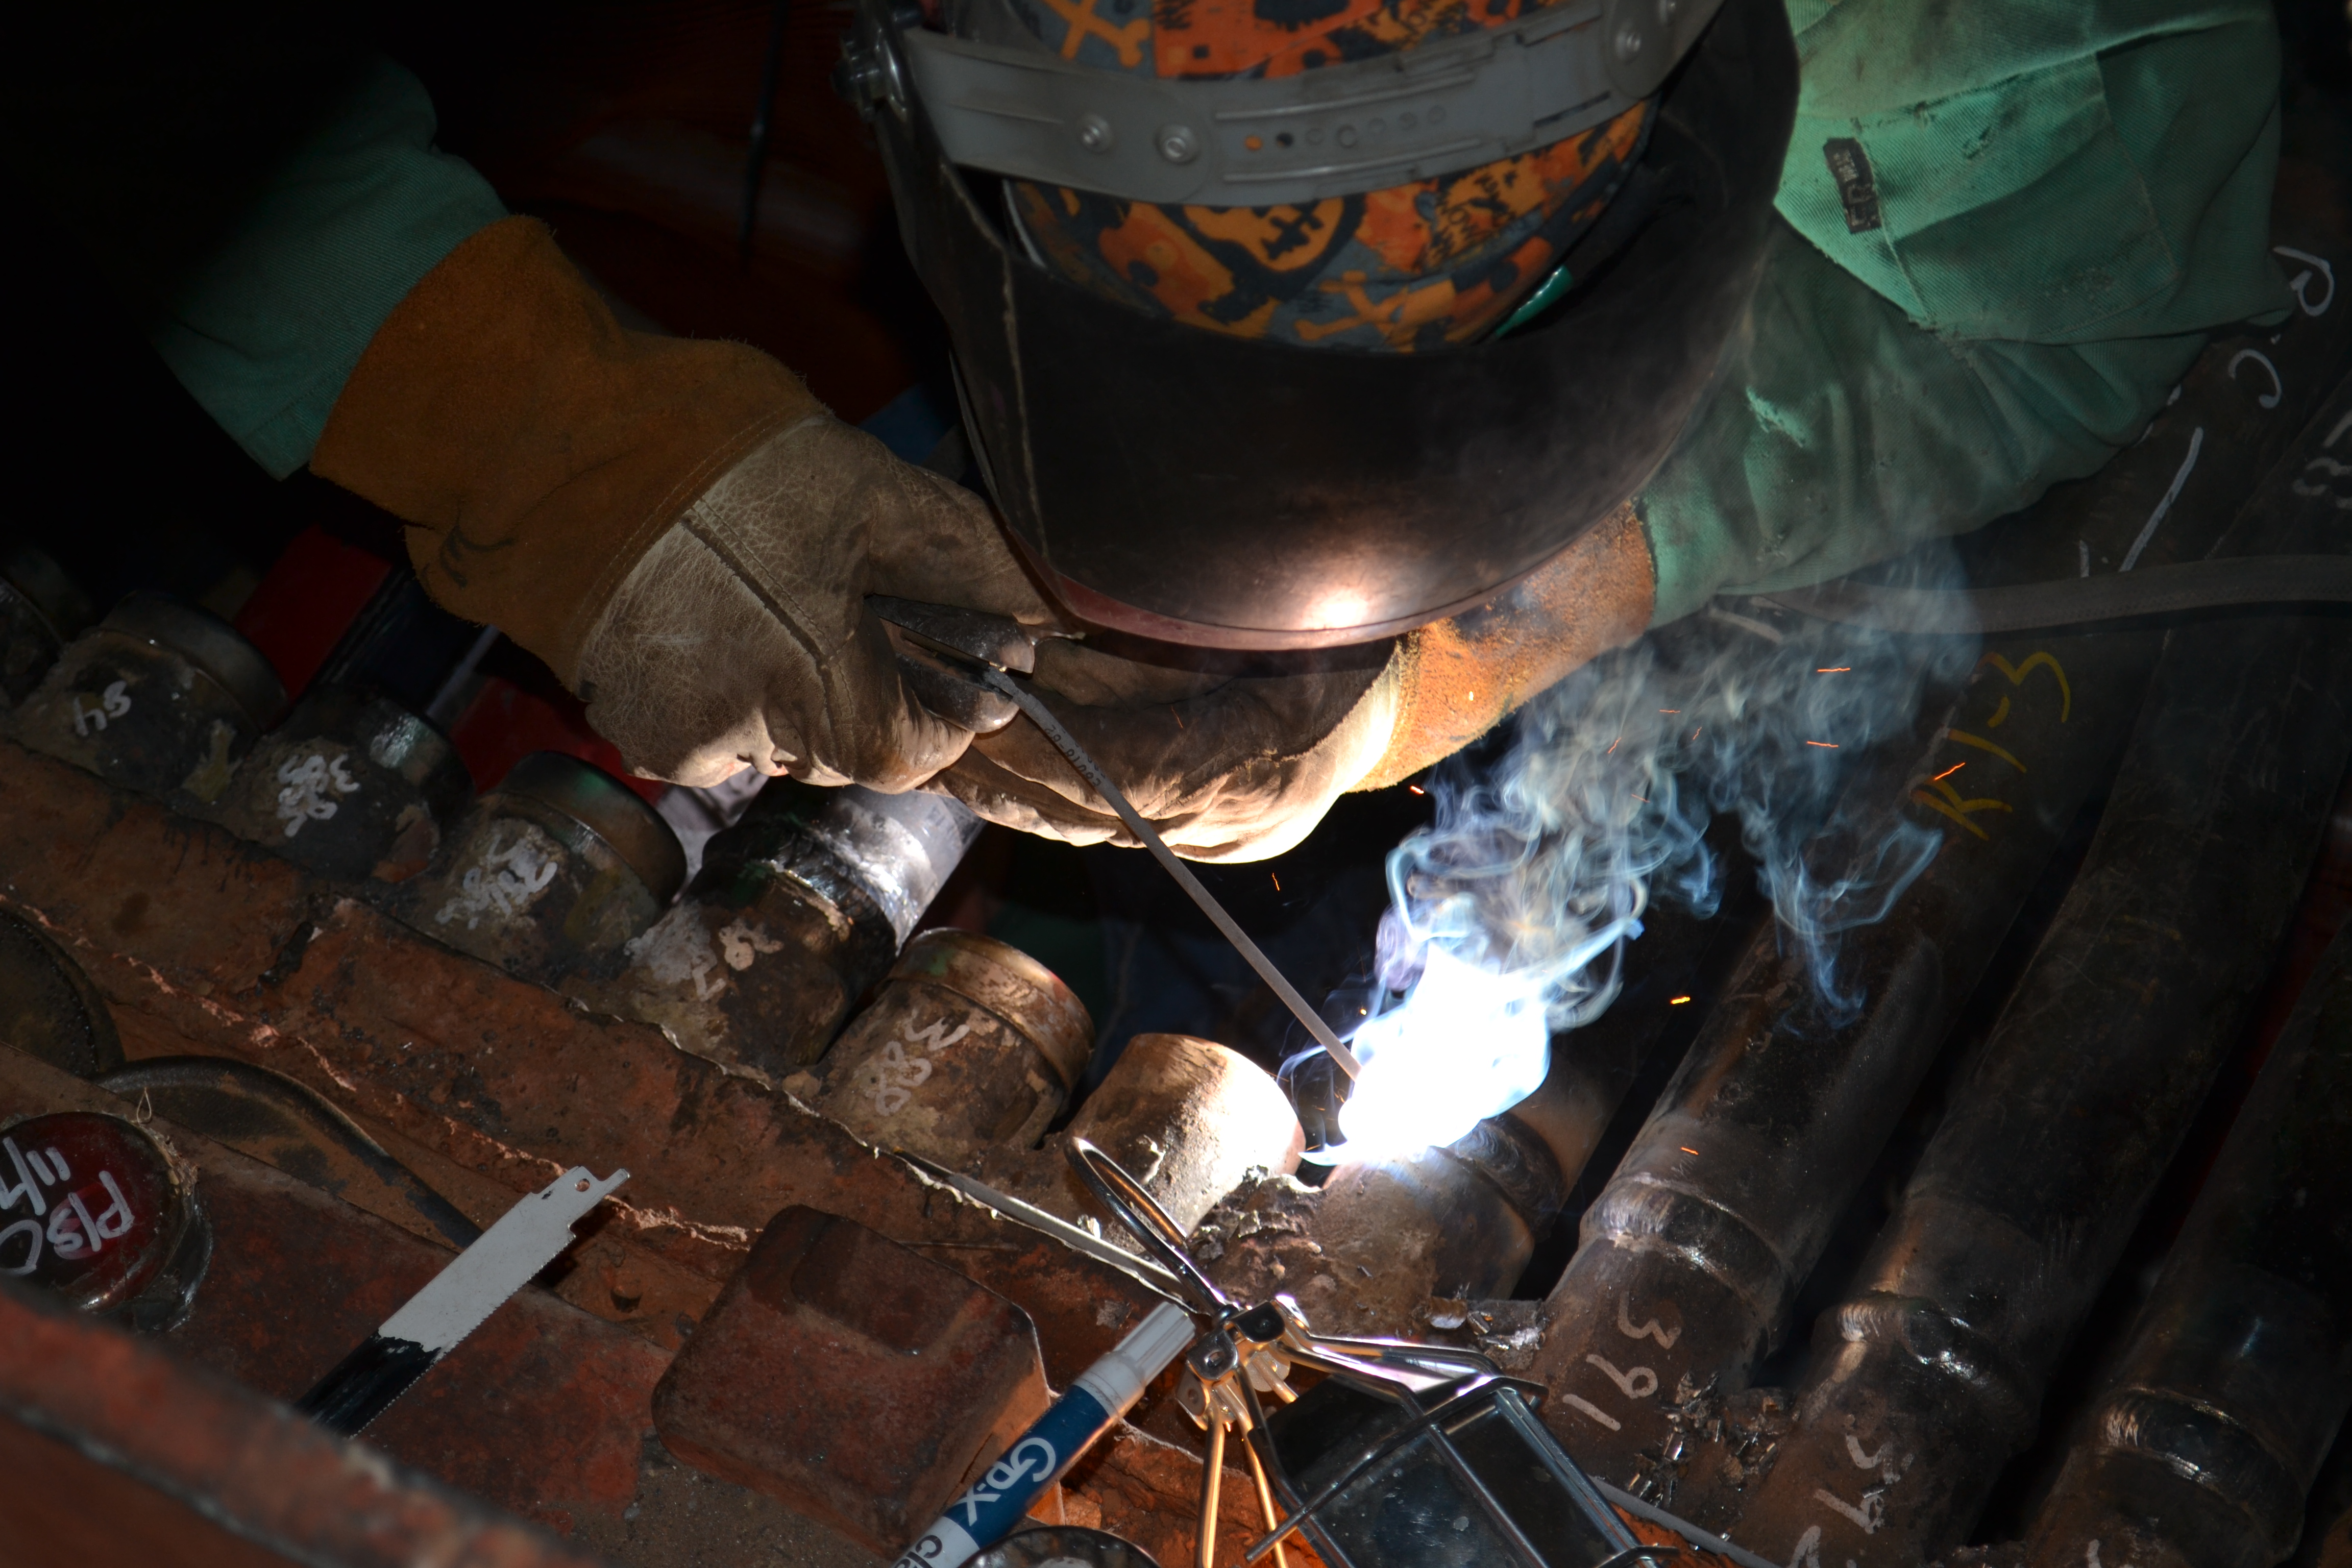 Boilermaker welding during a shutdown, turnaround, or outage.